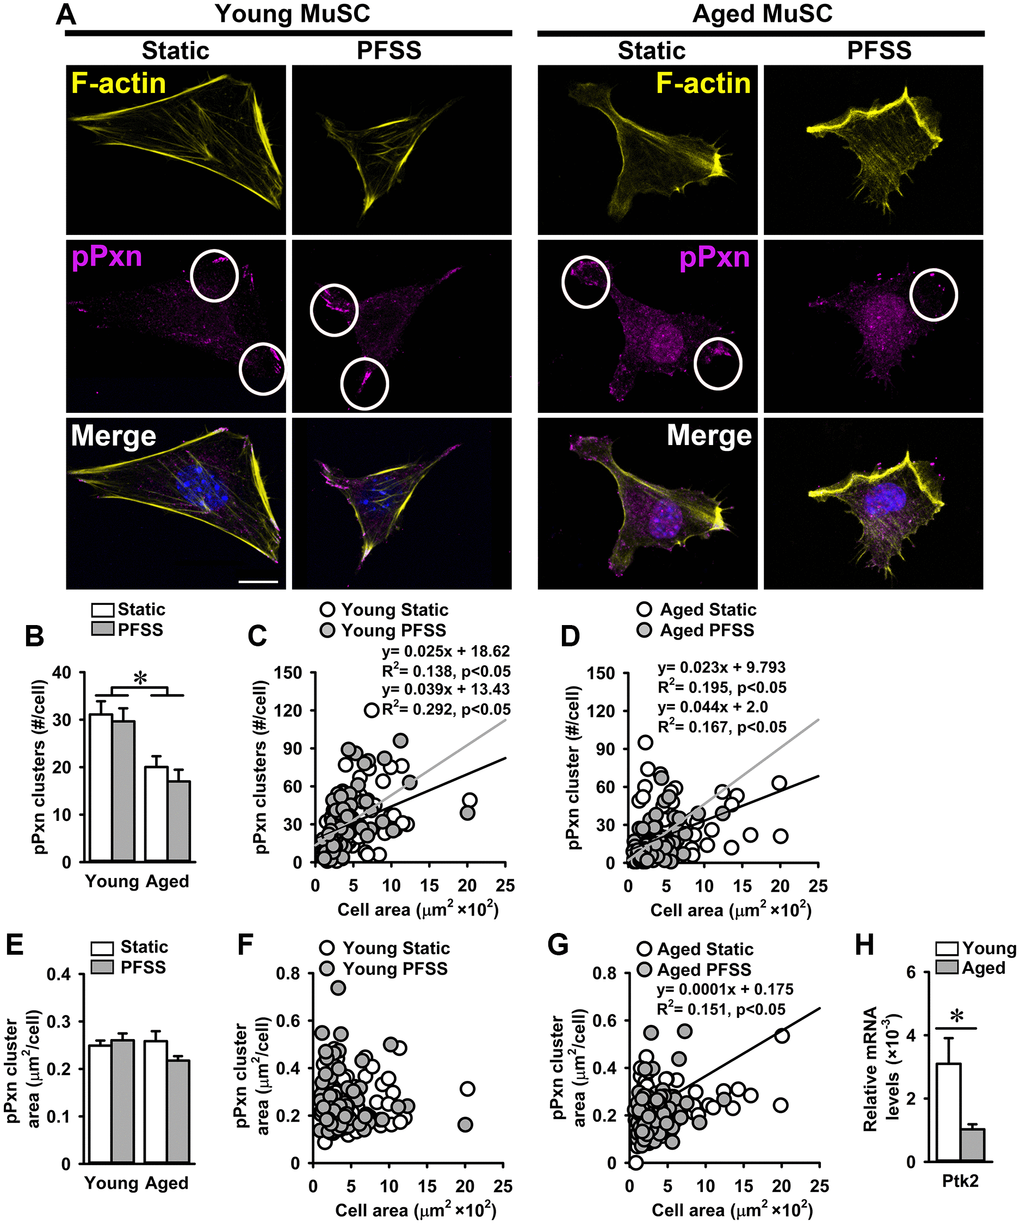 Aging is associated with a decline in the number of focal adhesions in MuSCs. (A) Young and aged MuSCs stained for phospho-paxillin (pPXN; magenta, white circles), F-actin filaments (yellow), and nuclei (blue) after 30 min of static and PFSS treatment. (B) Aged MuSCs illustrated lower number of pPXN clusters than young MuSCs and PFSS treatment did not affect the number of pPXN clusters. (C, D) Correlation between pPXN cluster number and cell attachment area in young and aged MuSCs. (E) pPXN cluster area in young and aged MuSCs after static and PFSS treatment. (F, G) Correlation between pPXN cluster area and cell attachment area in young and aged MuSCs. Young MuSCs, n = 63–74 (from 3 young mice). Aged MuSCs, n = 93–95 (from 3 aged mice). (H) Aged MuSCs exhibited lower gene expression of Ptk2. Young MuSCs, n = 11 (from 4 young mice). Aged MuSCs, n = 9 (from 3 aged mice). Abbreviations: MuSCs: muscle stem cells; PFSS: pulsating fluid shear stress. Values are mean ± SEM. *Significant effect of age, p 